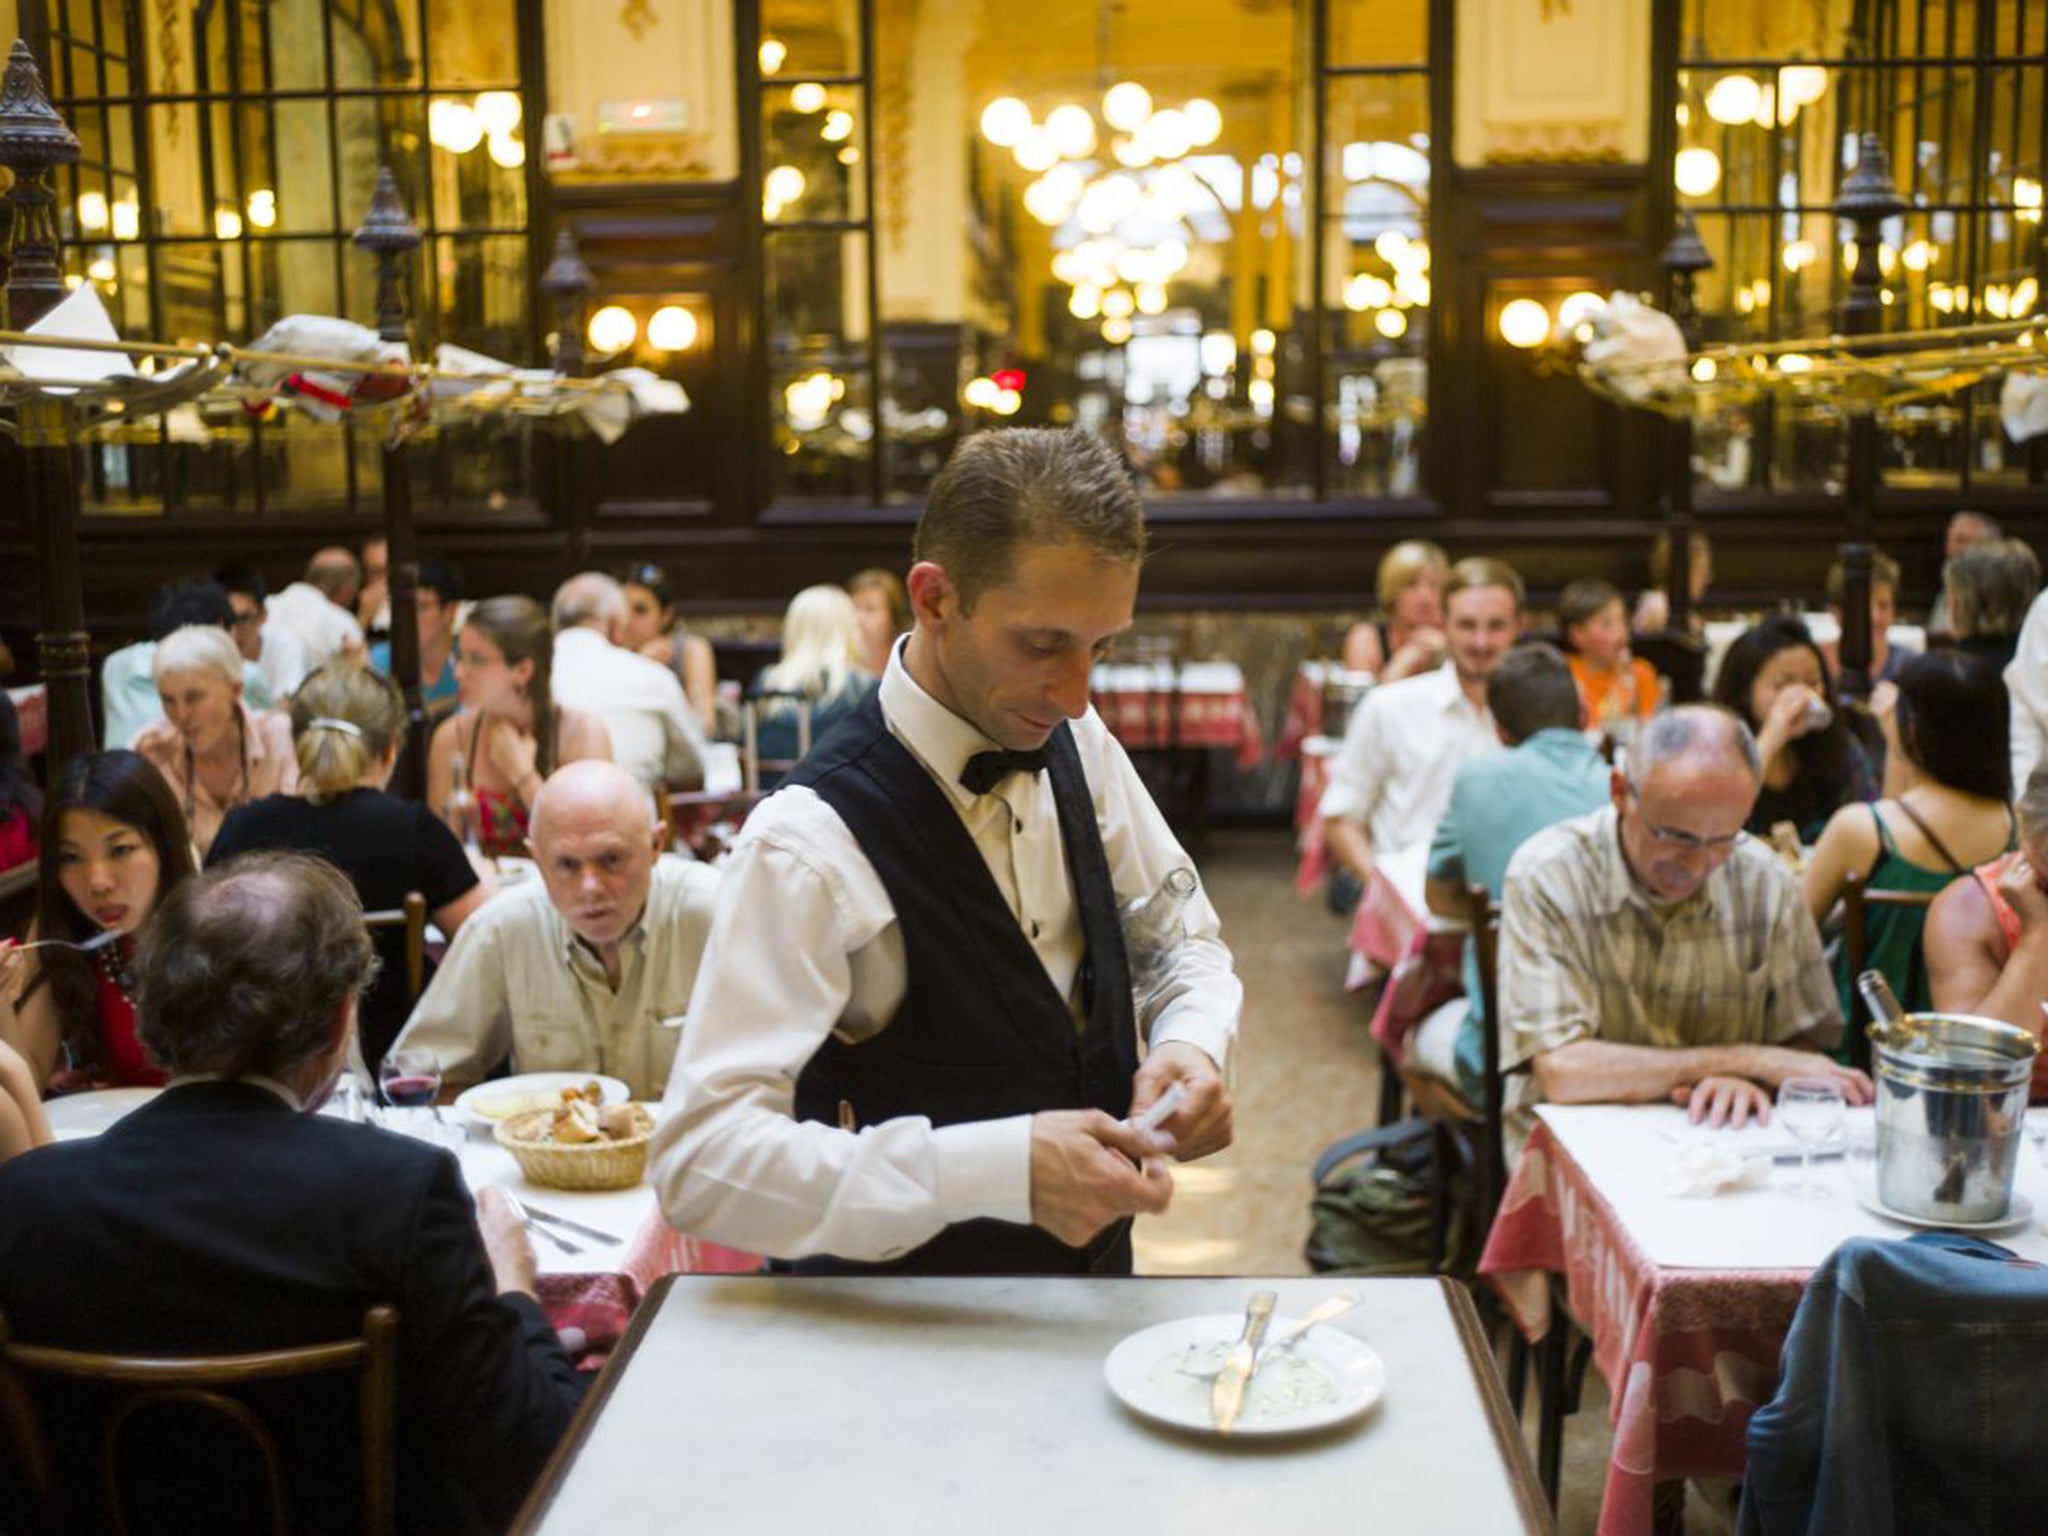 In France there are fewer waiters per diner than you would find in most UK establishments